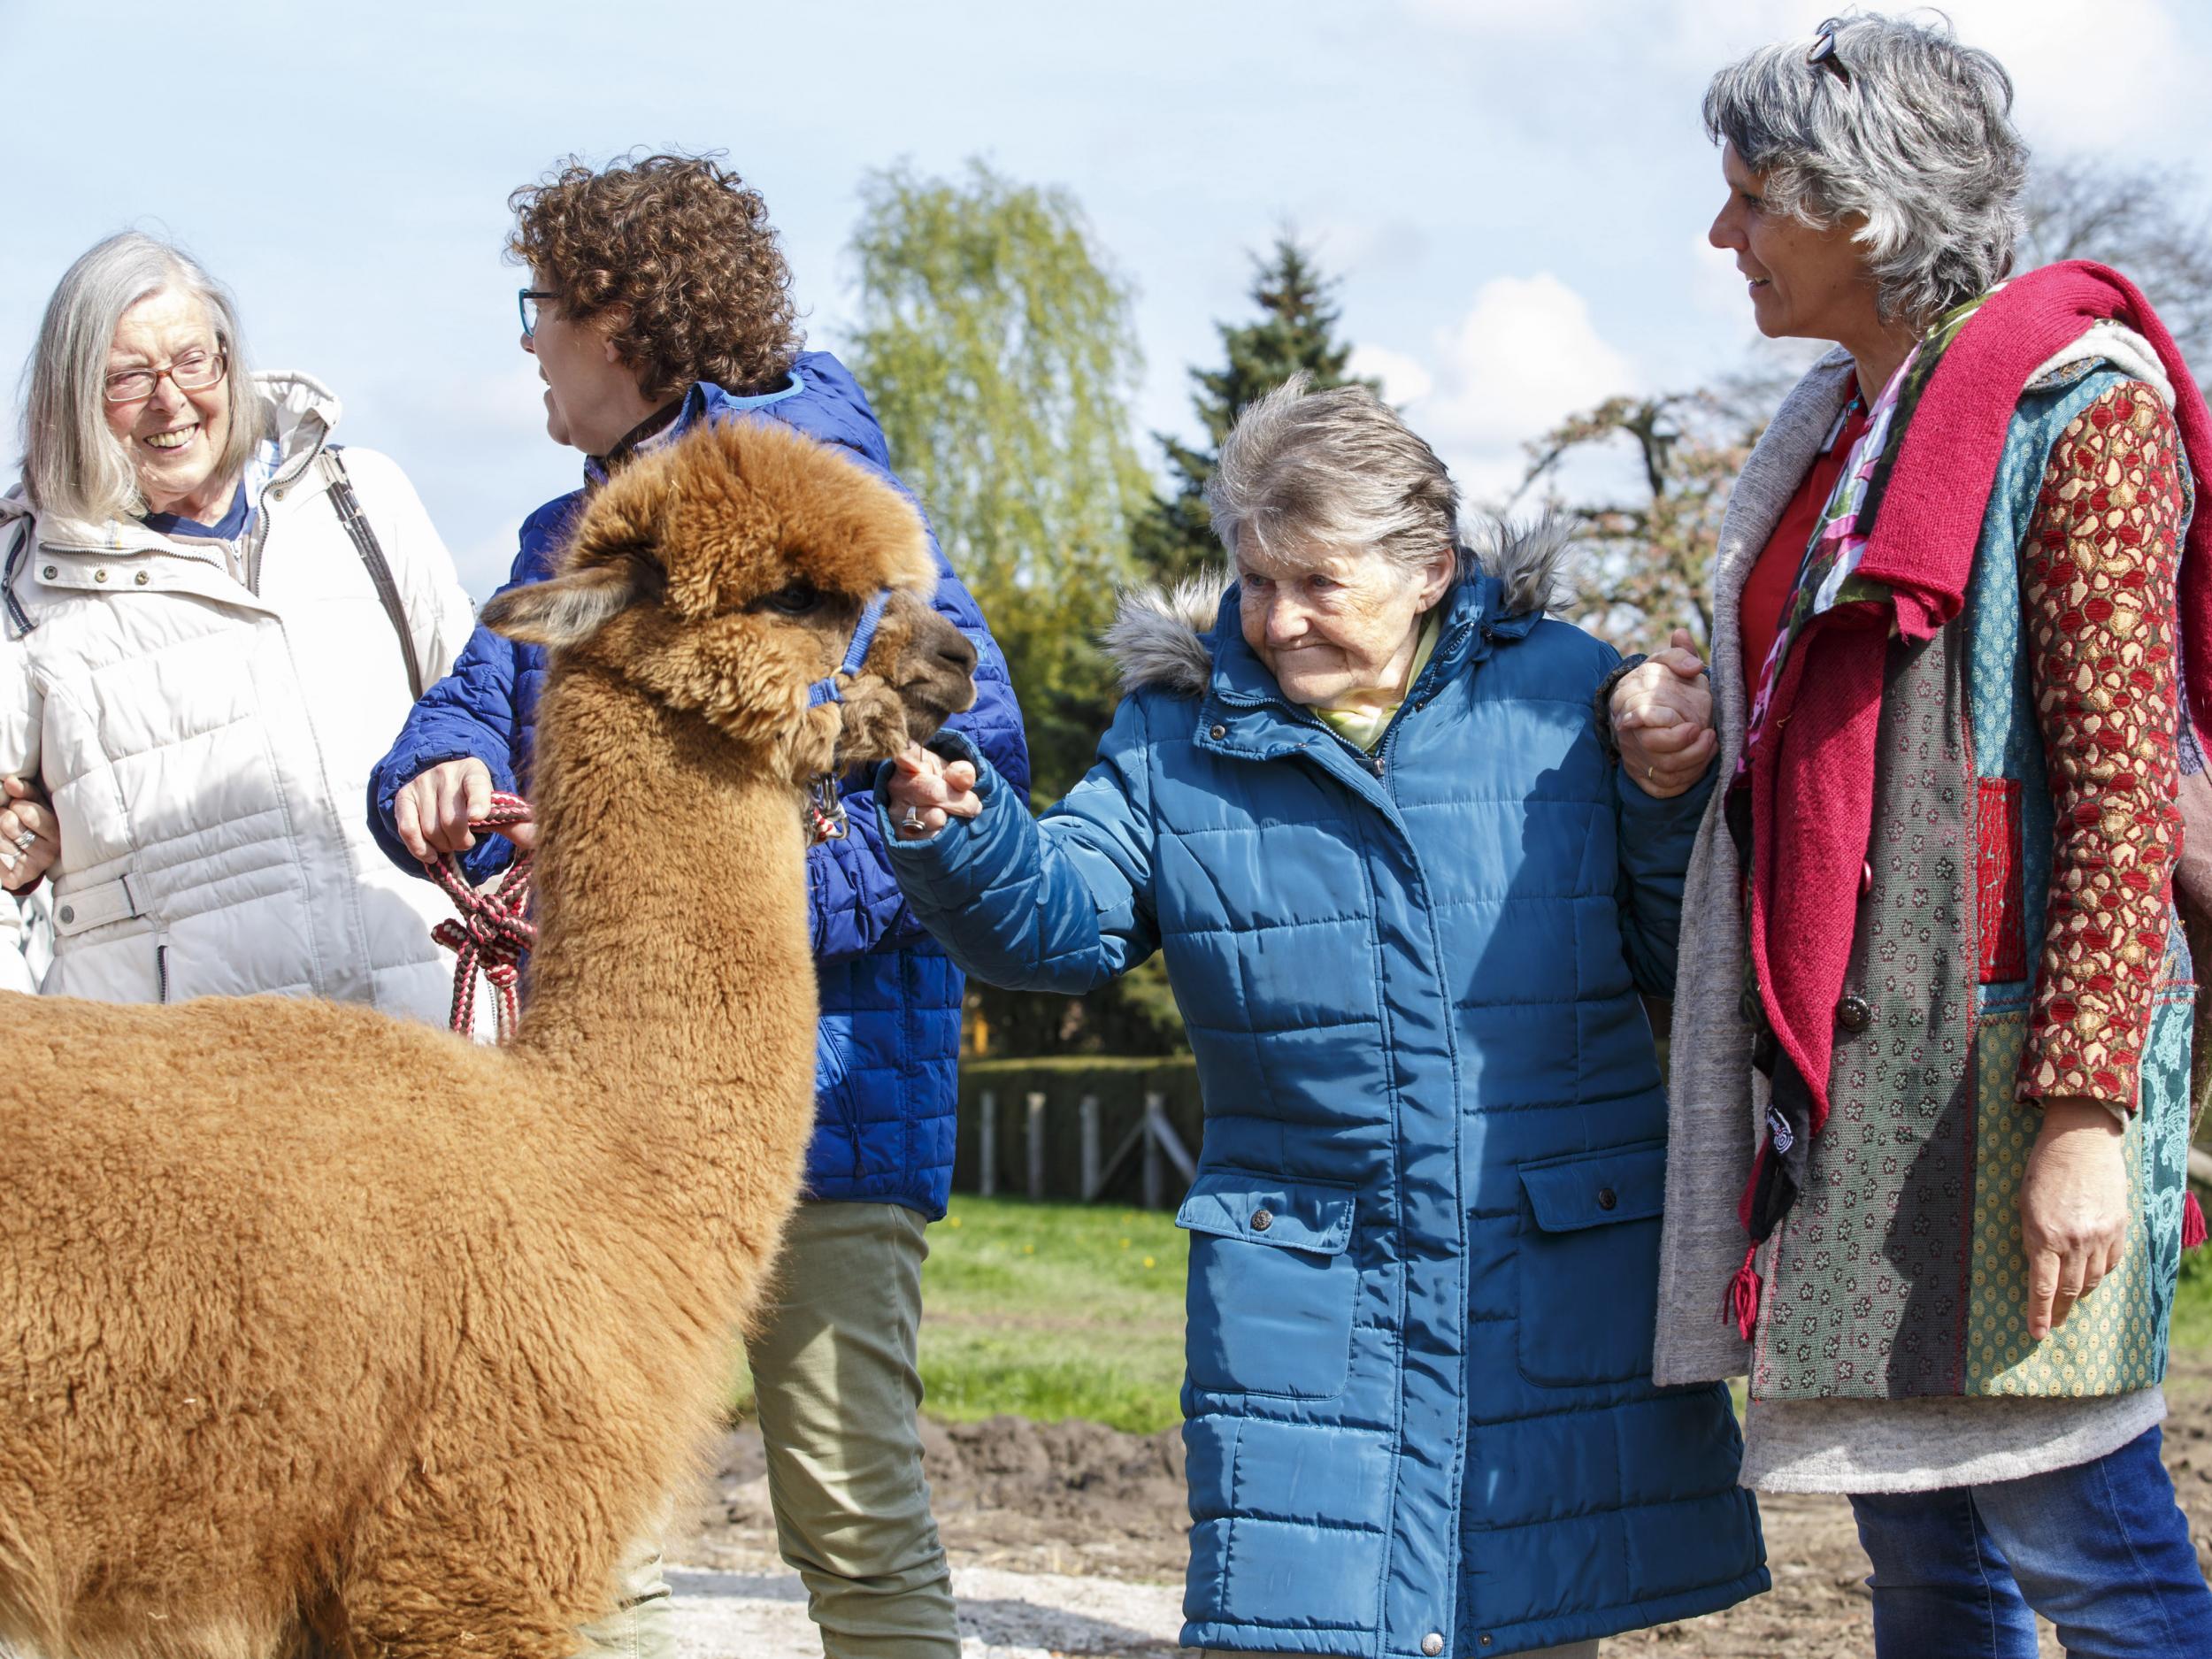 Dementia patients and their helpers visit an alpaca farm as therapy. In 2015, the condition claimed more than 61,000 lives and accounted for 11.6 per cent of recorded deaths